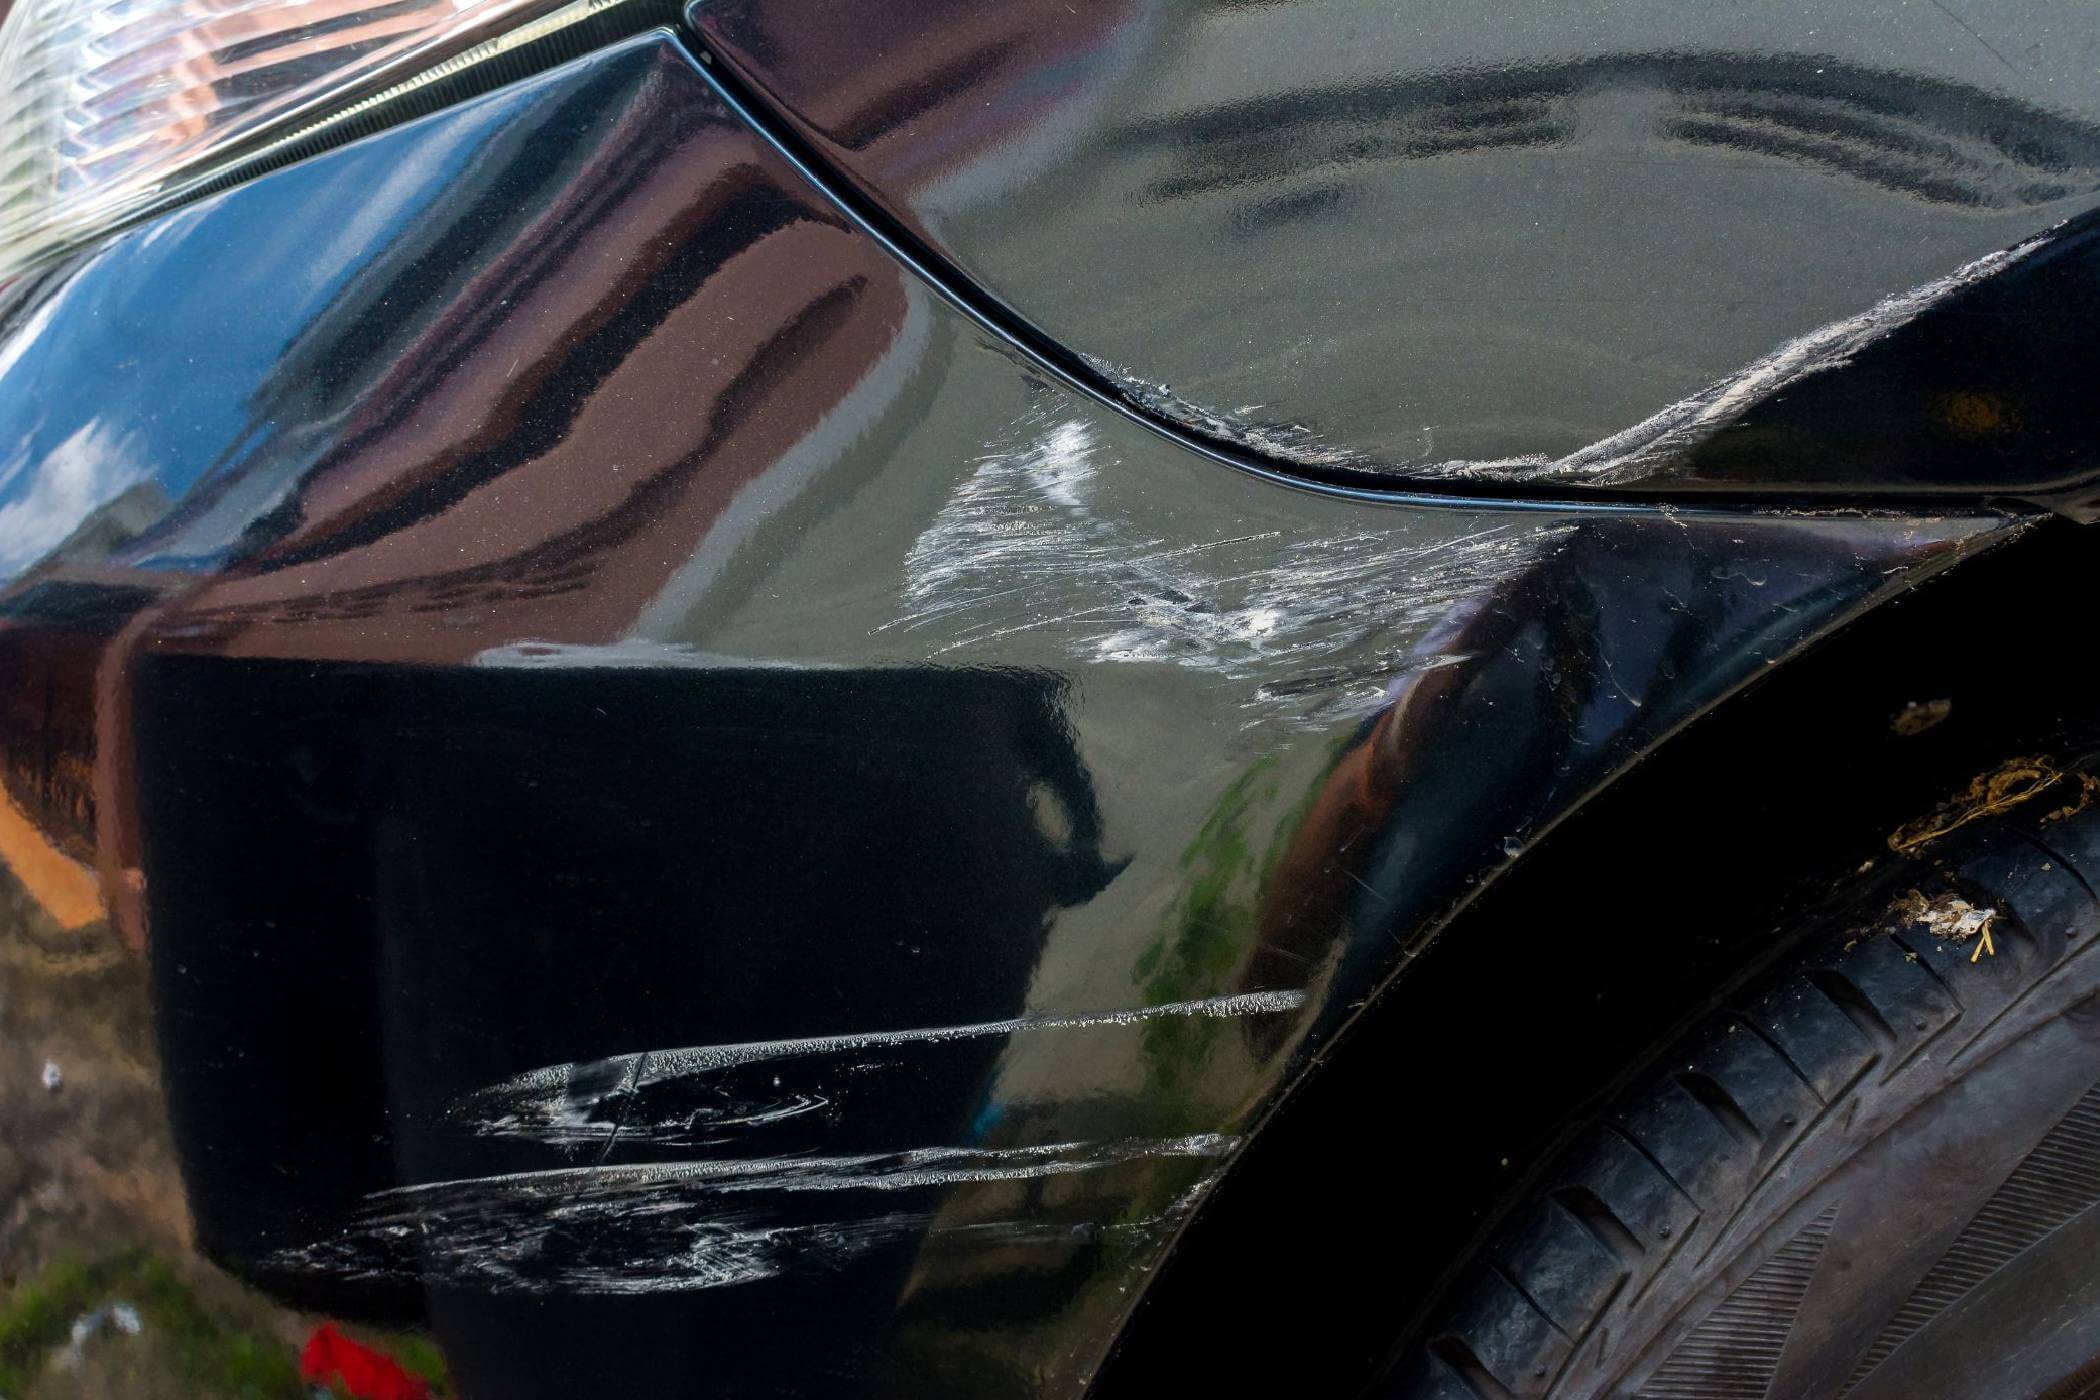 8 Causes Of Car Paint Damage & How To Prevent Them - Scratch On Black Car 1